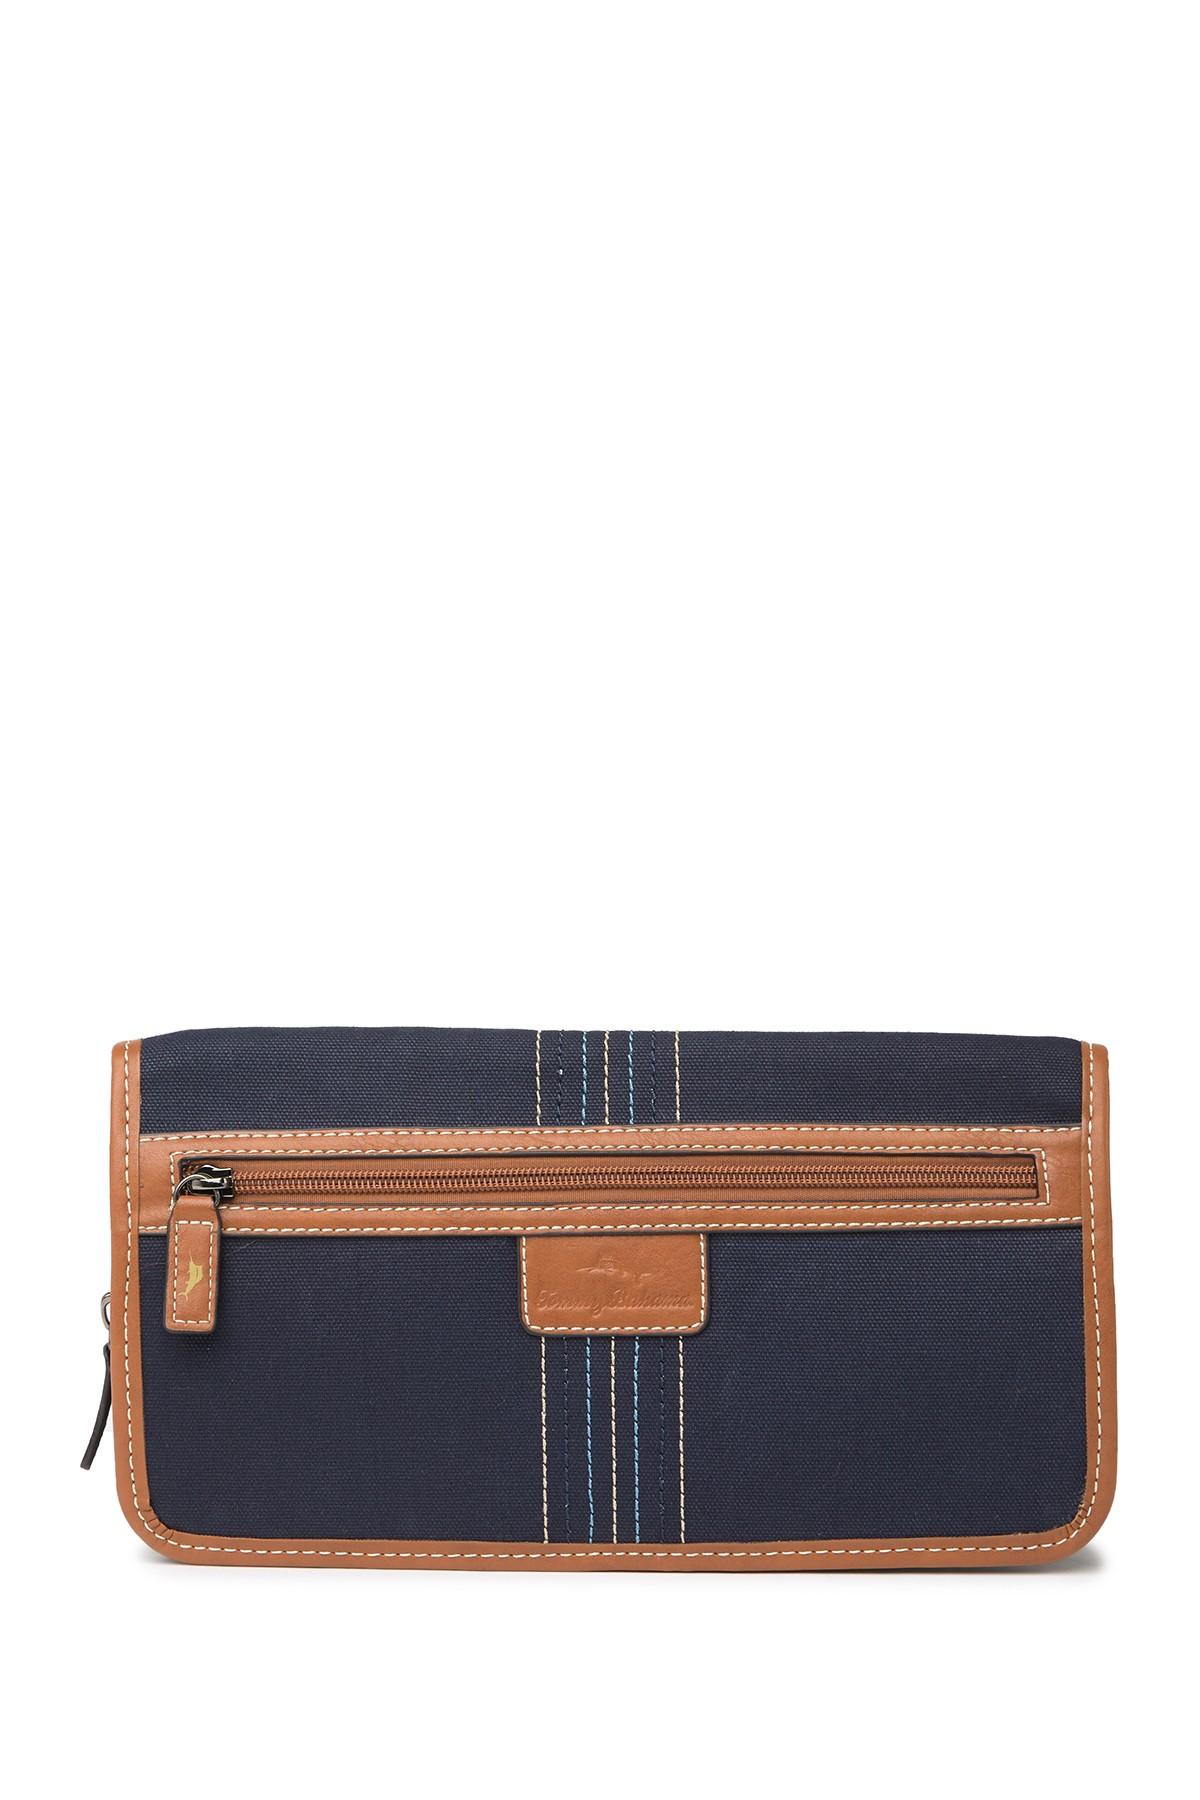 Tommy Bahama Hanging Canvas Travel Bag in Blue - Lyst